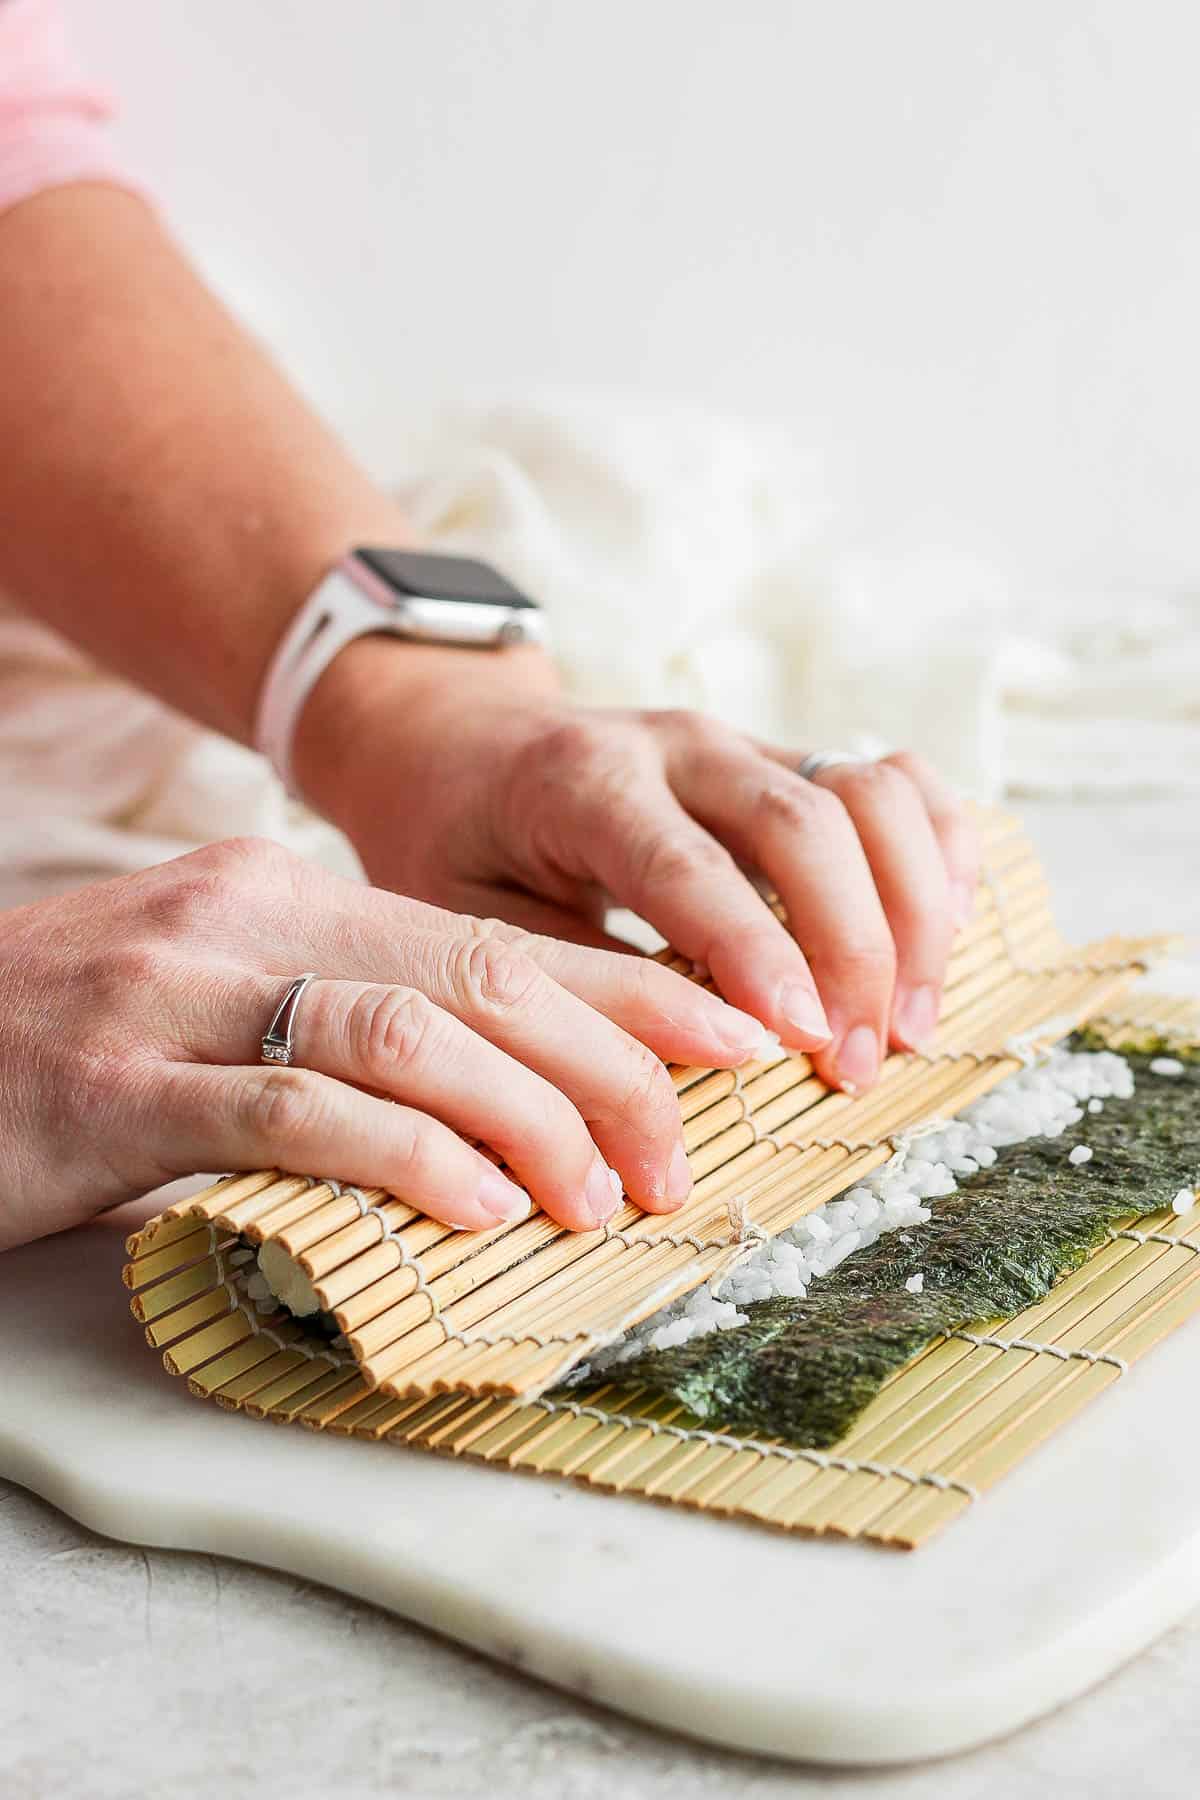 Two hands tucking the nori sheet and bamboo sheet over the filling.